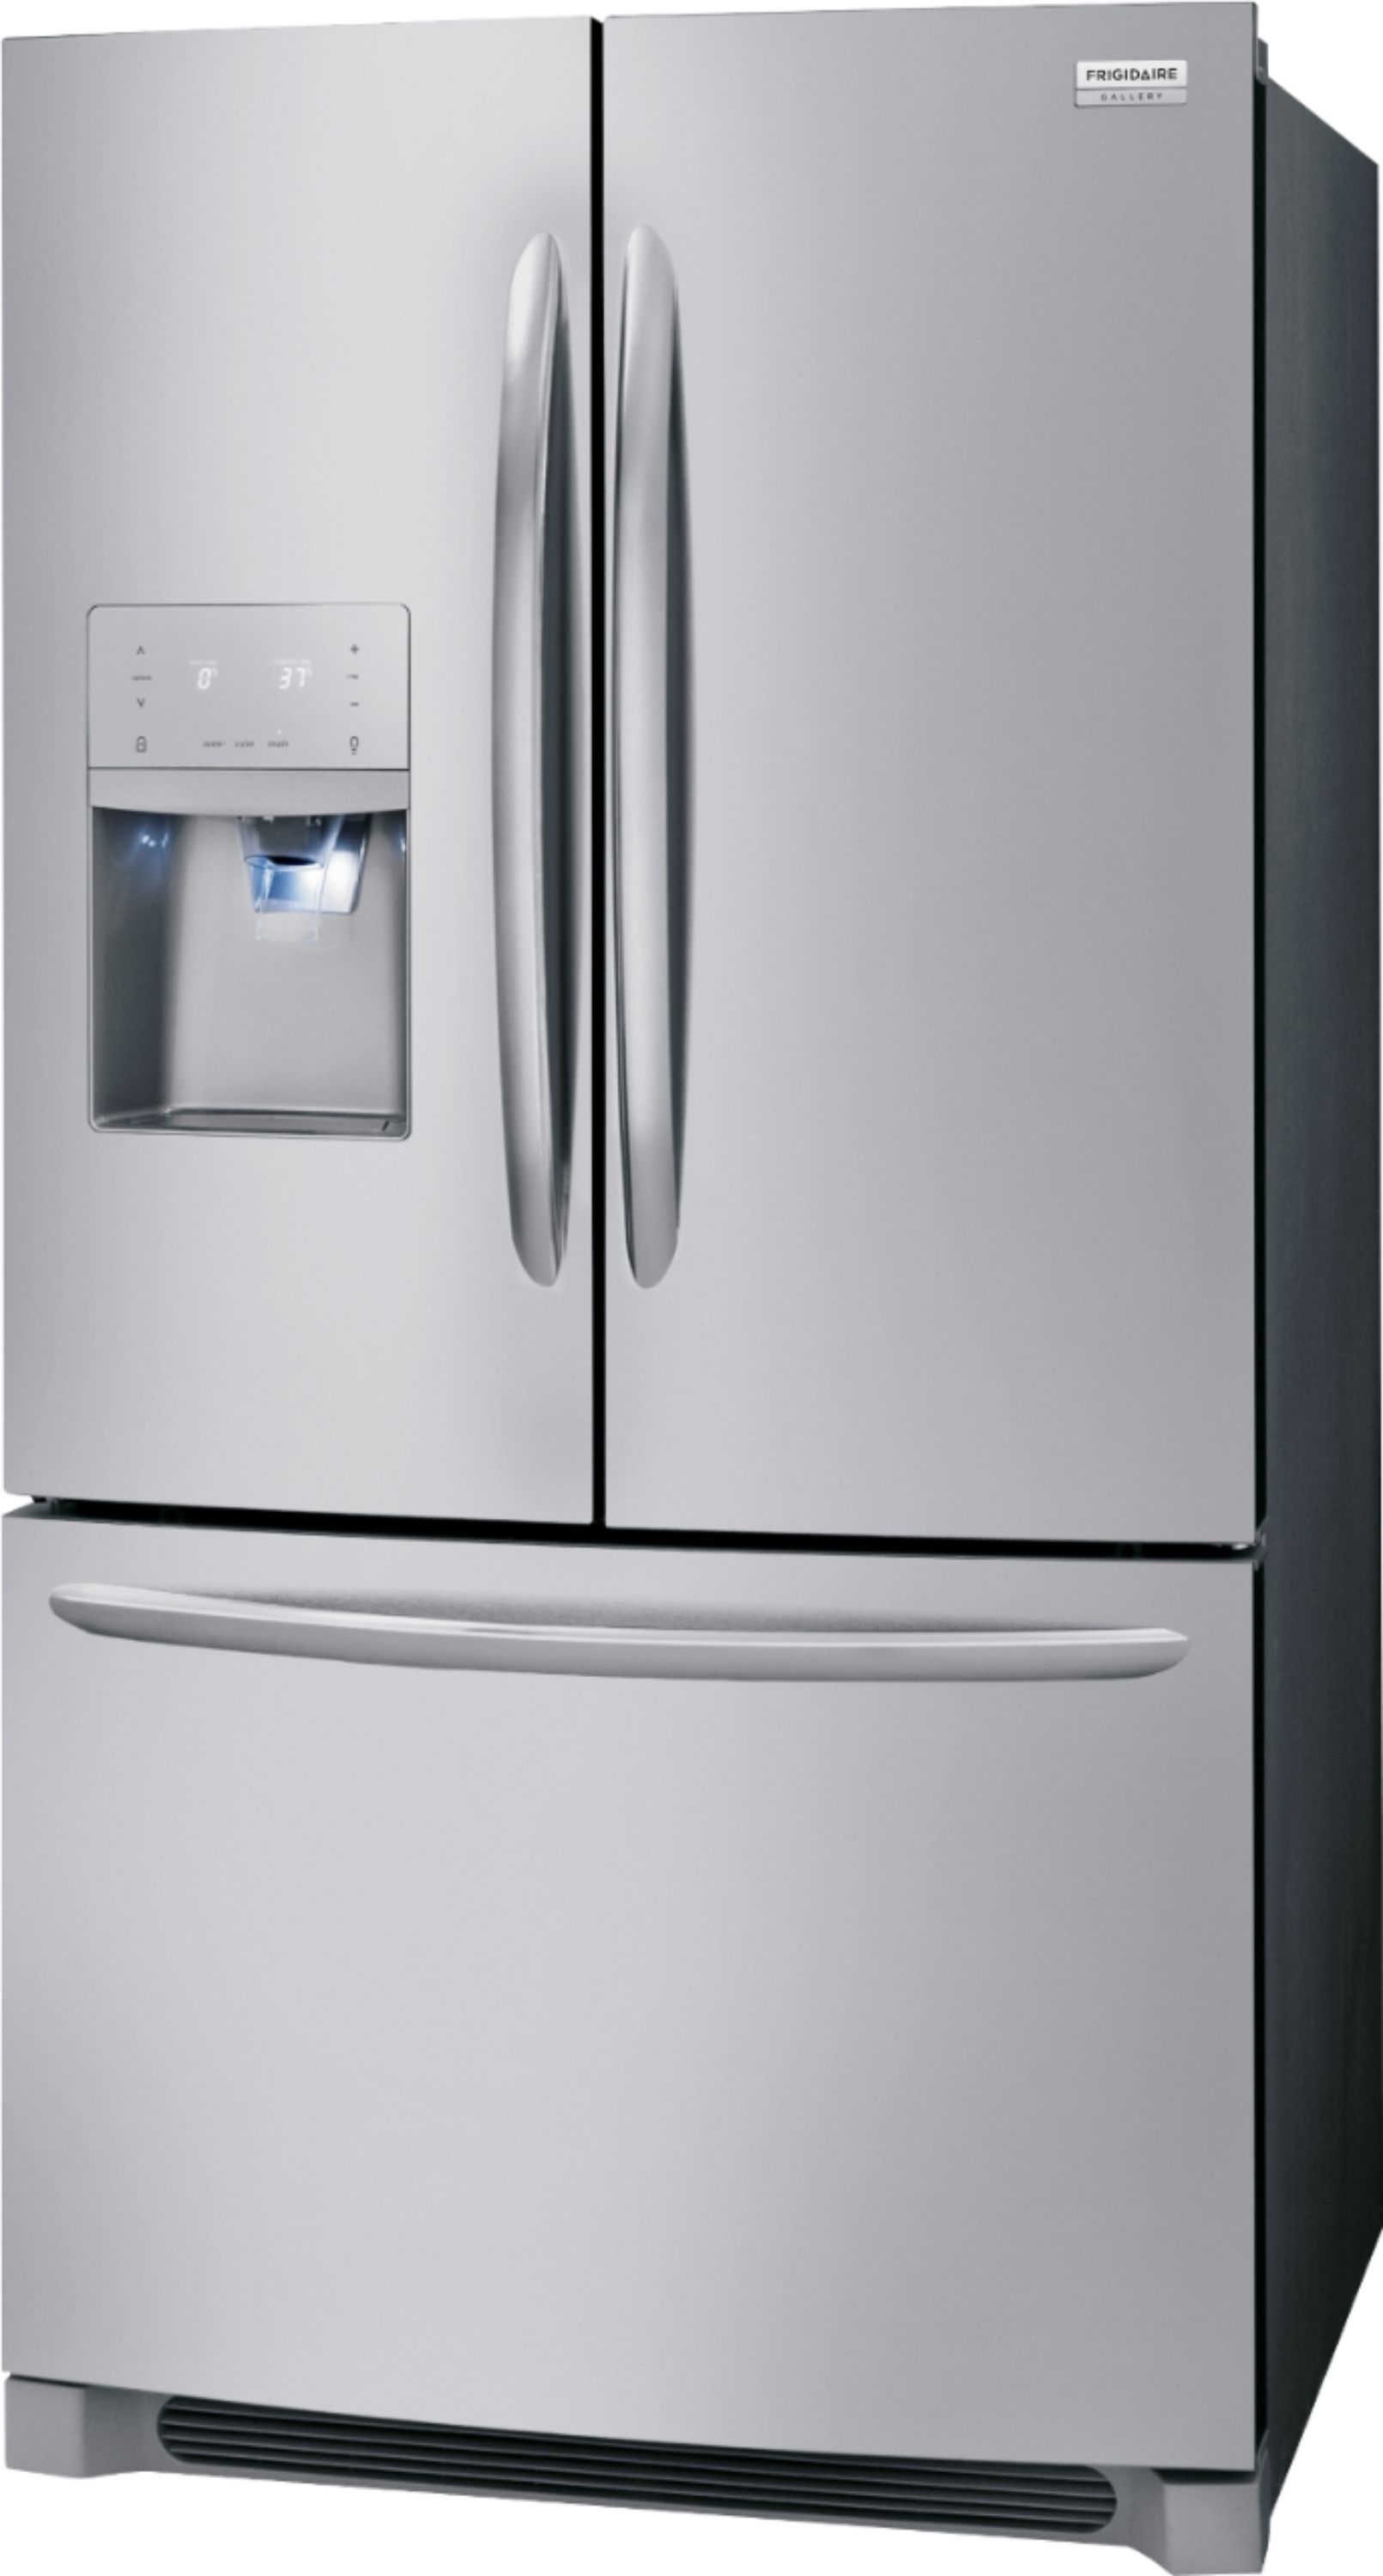 Left View: Frigidaire - Gallery 26.8 Cu. Ft. French Door Refrigerator - Stainless steel